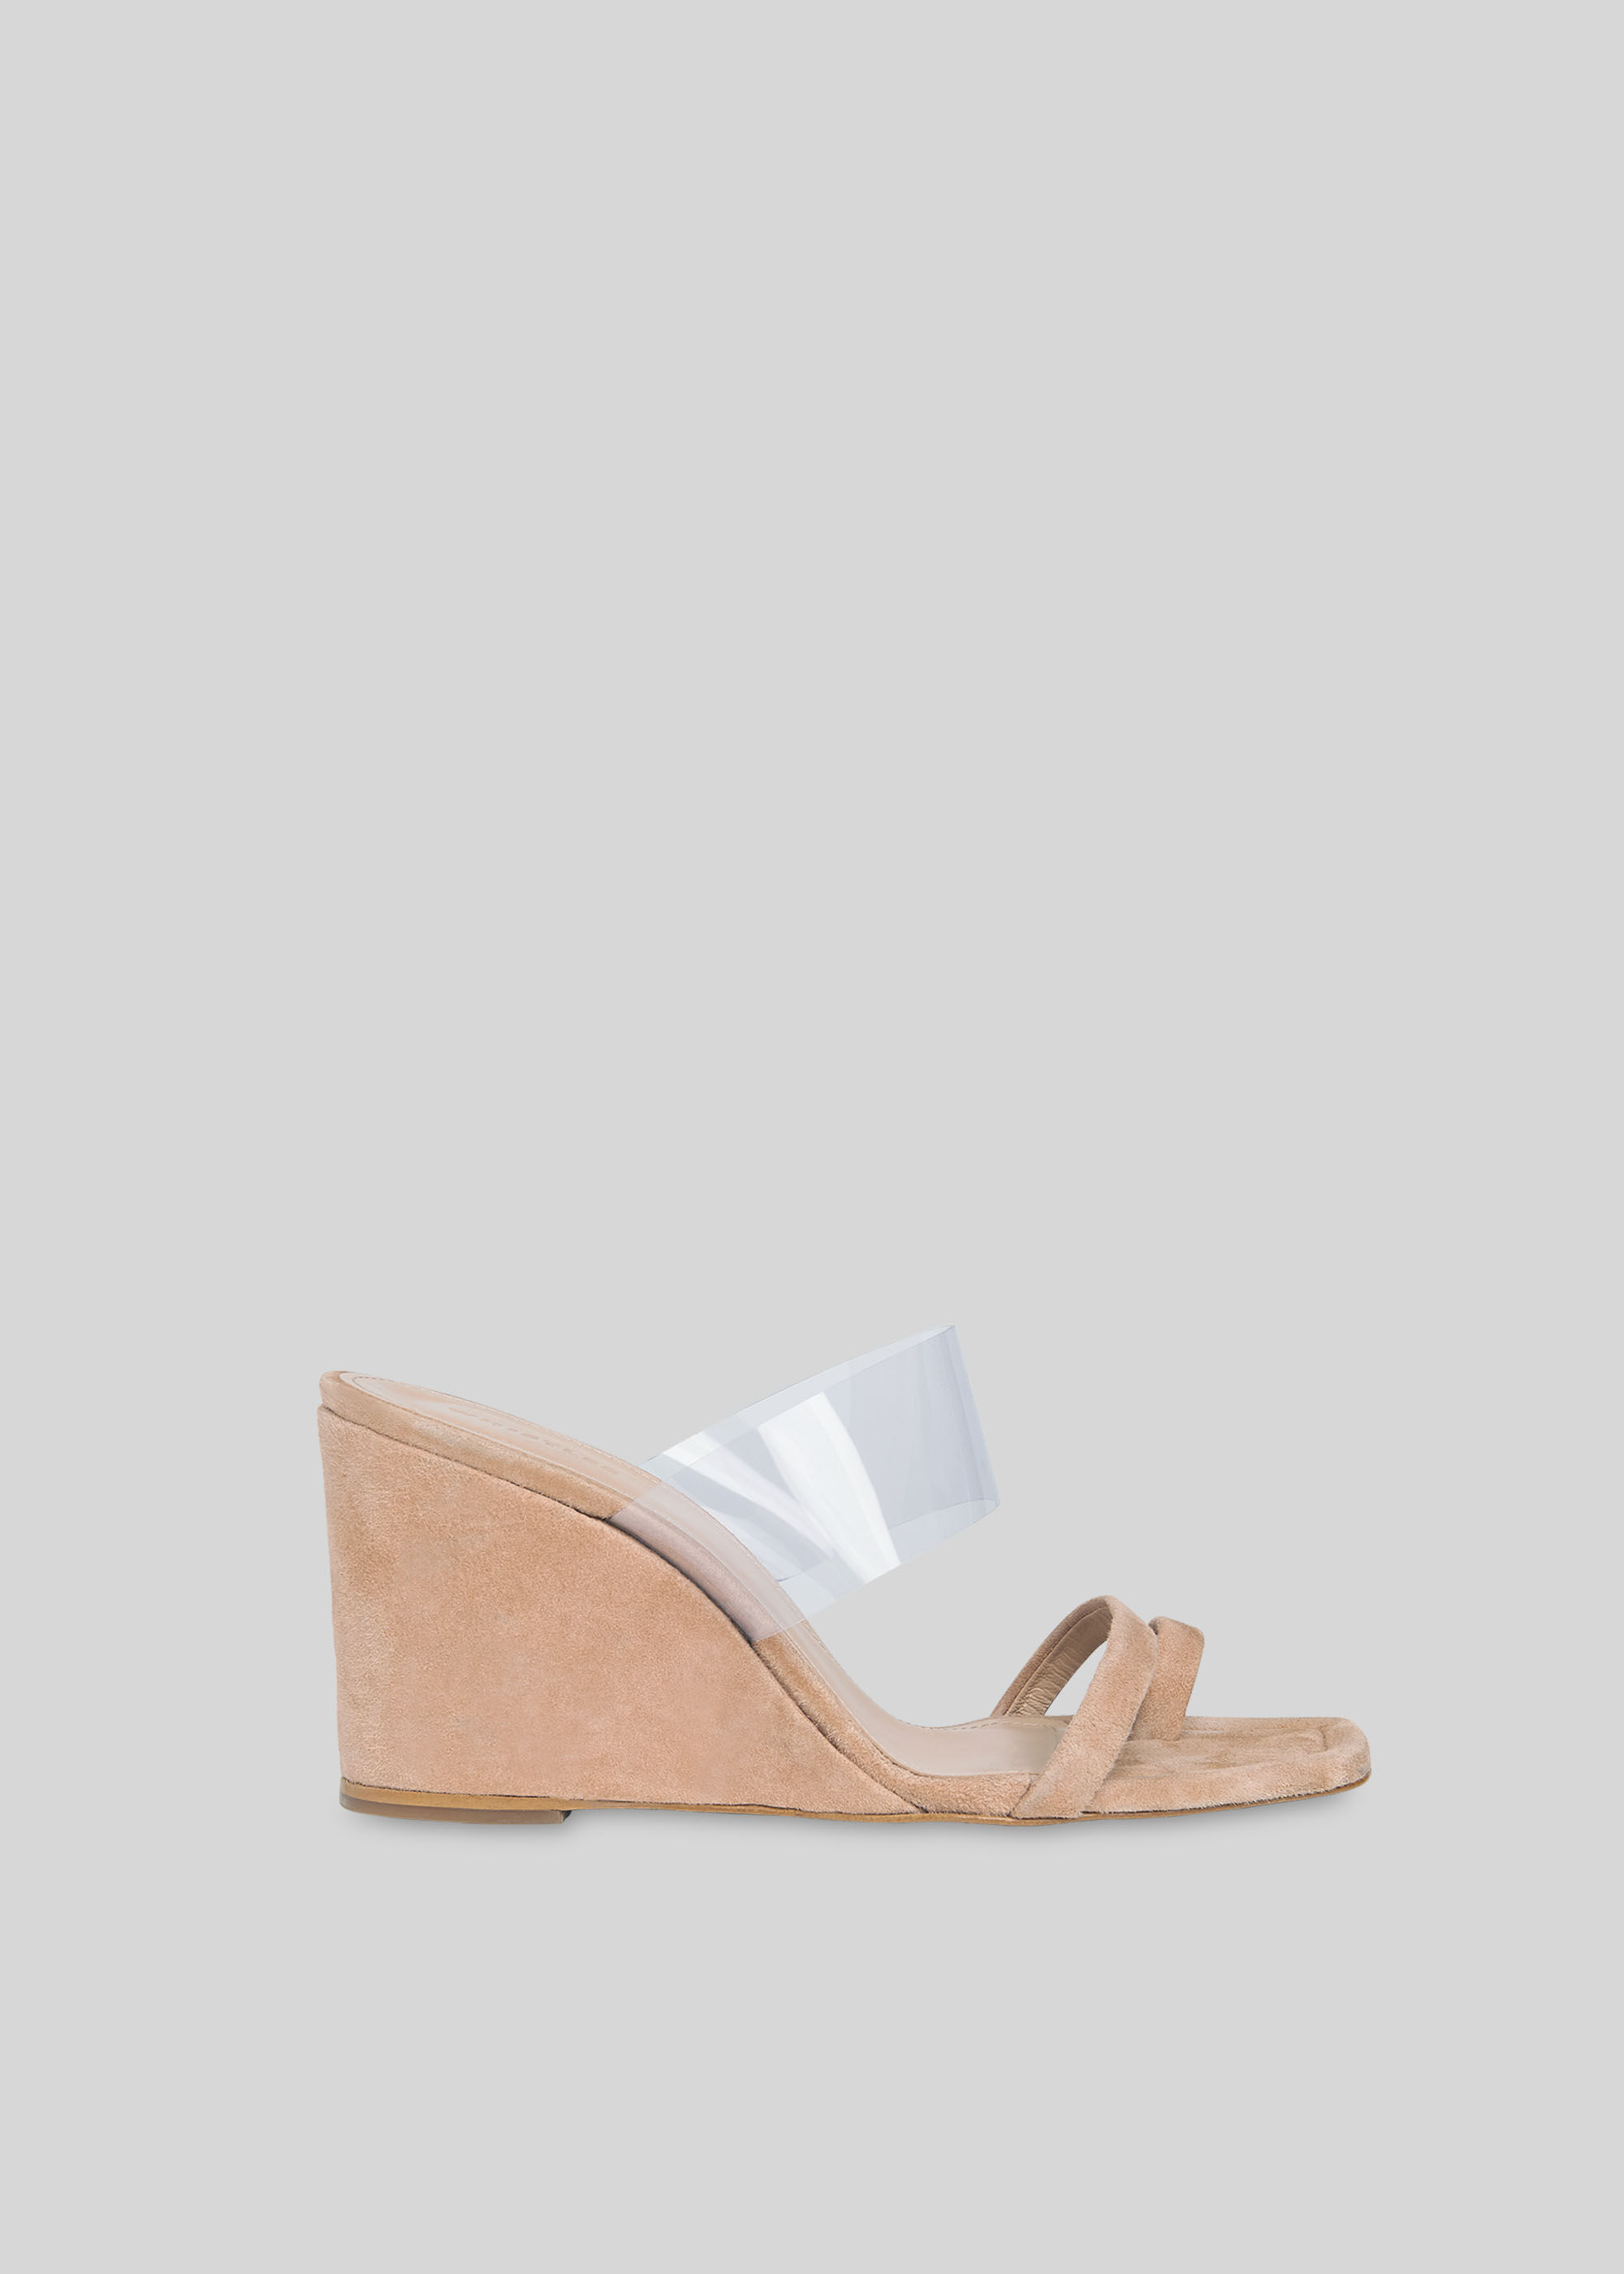 nude wedges